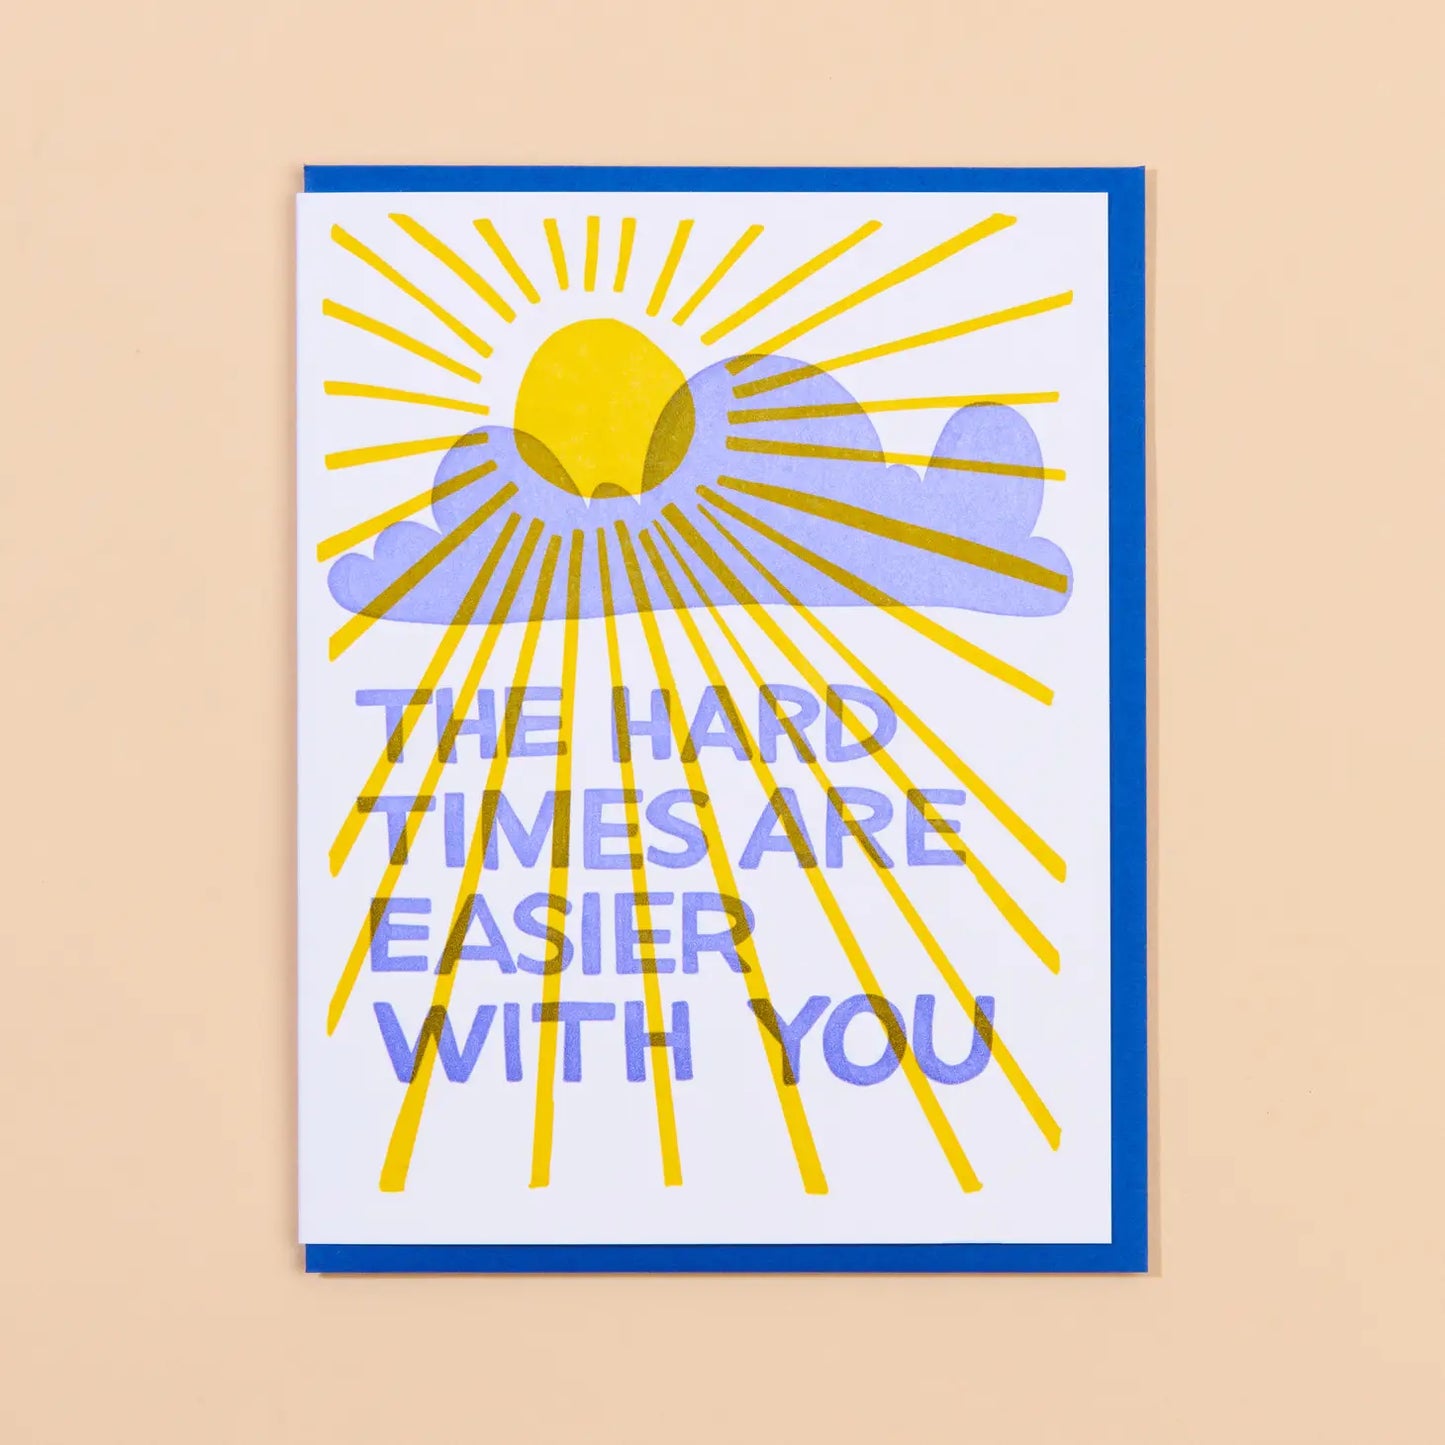 "Easier With You" Letterpress Greeting Card | Love & Anniversary Card, Friendship Card